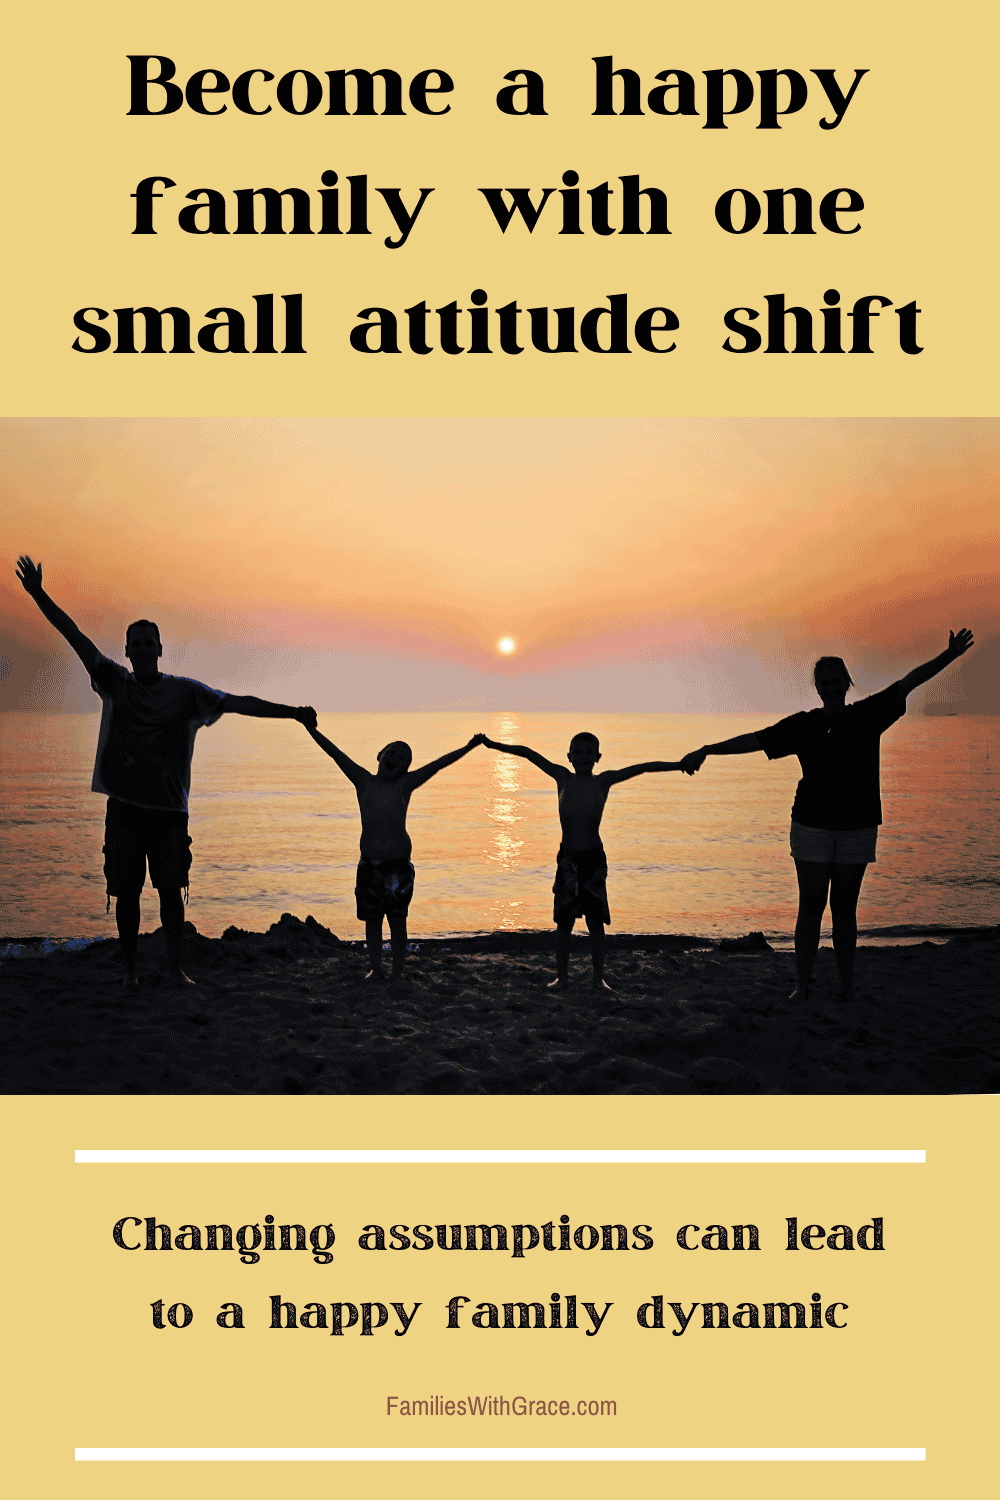 Become a happy family with one small attitude shift